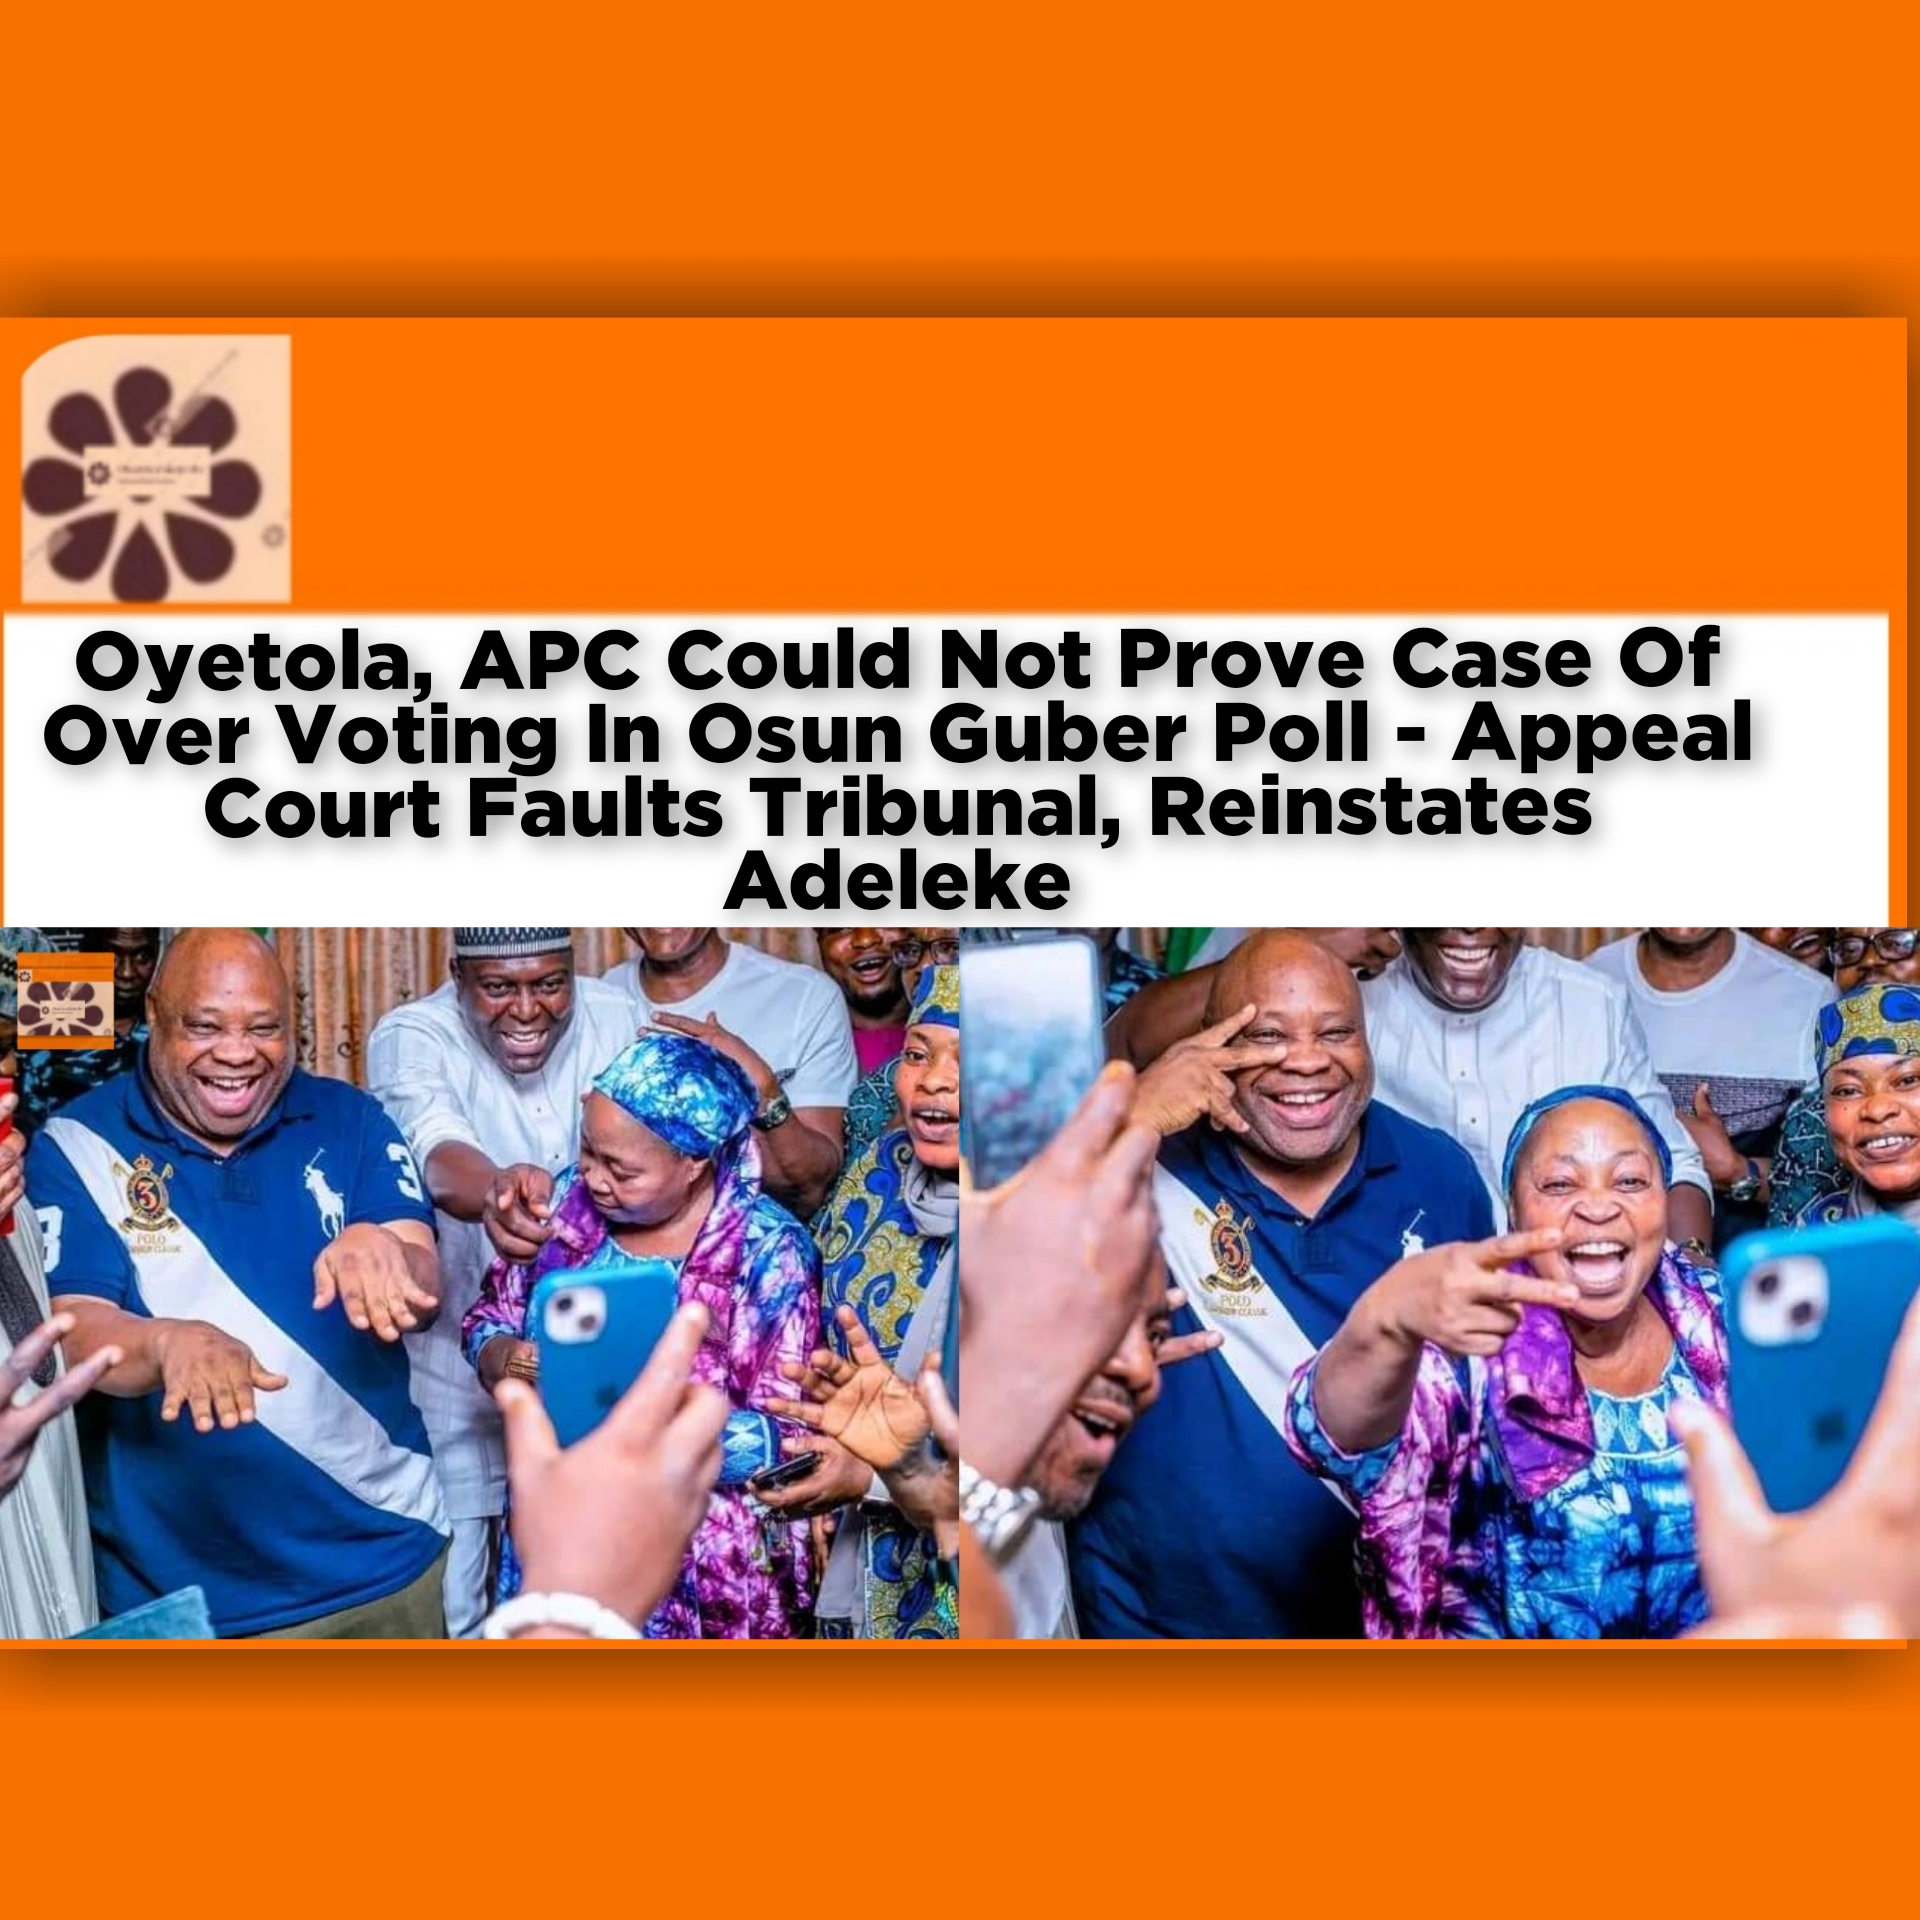 Oyetola, APC Could Not Prove Case Of Over Voting In Osun Guber Poll - Appeal Court Faults Tribunal, Reinstates Adeleke ~ OsazuwaAkonedo #Ihiala